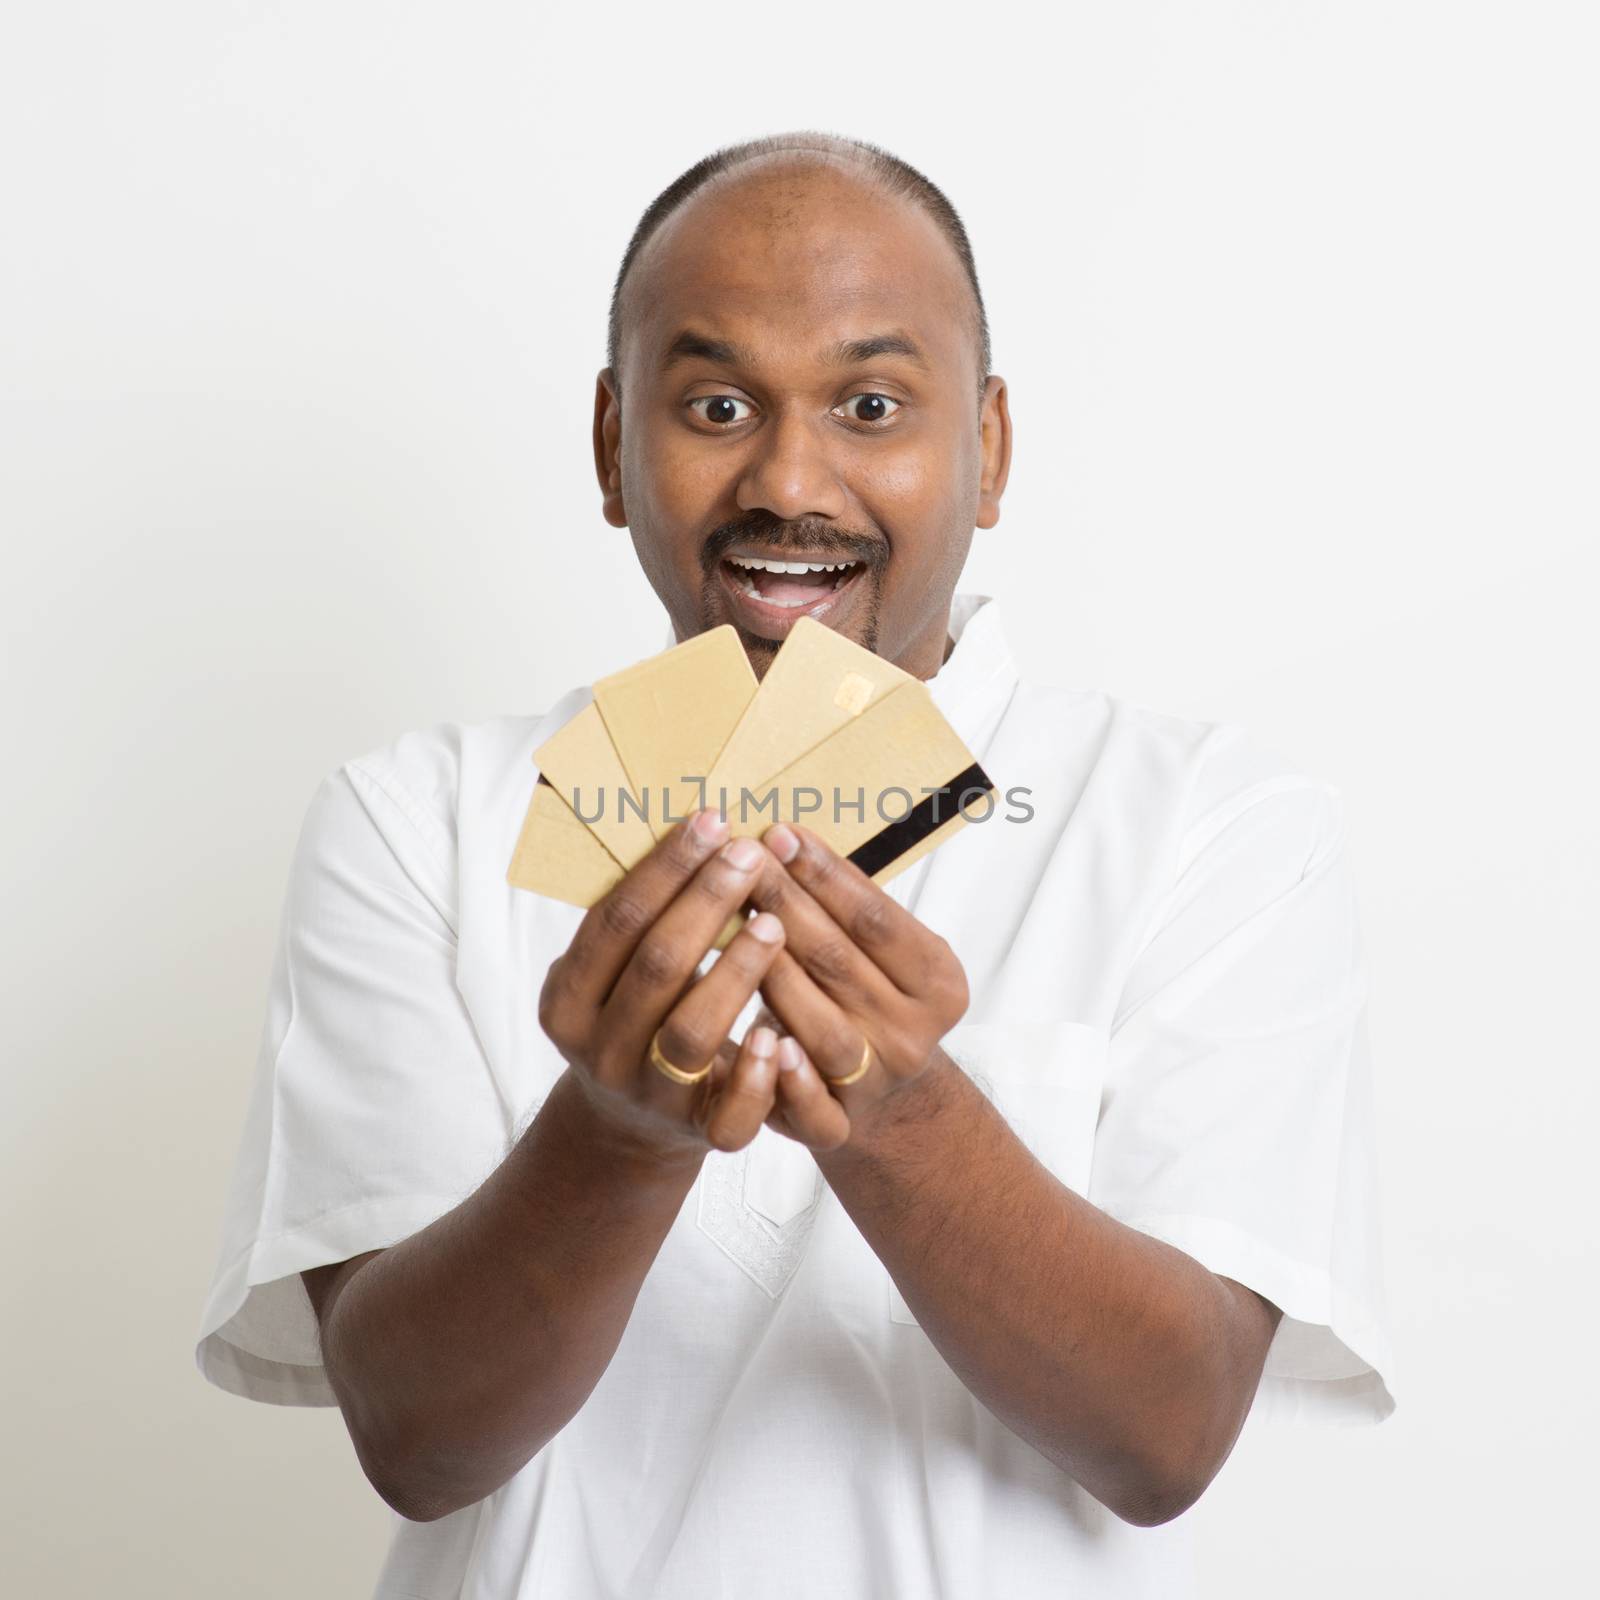 Portrait of mature casual business Indian man holding many credit cards and laughing, standing on plain background with shadow.